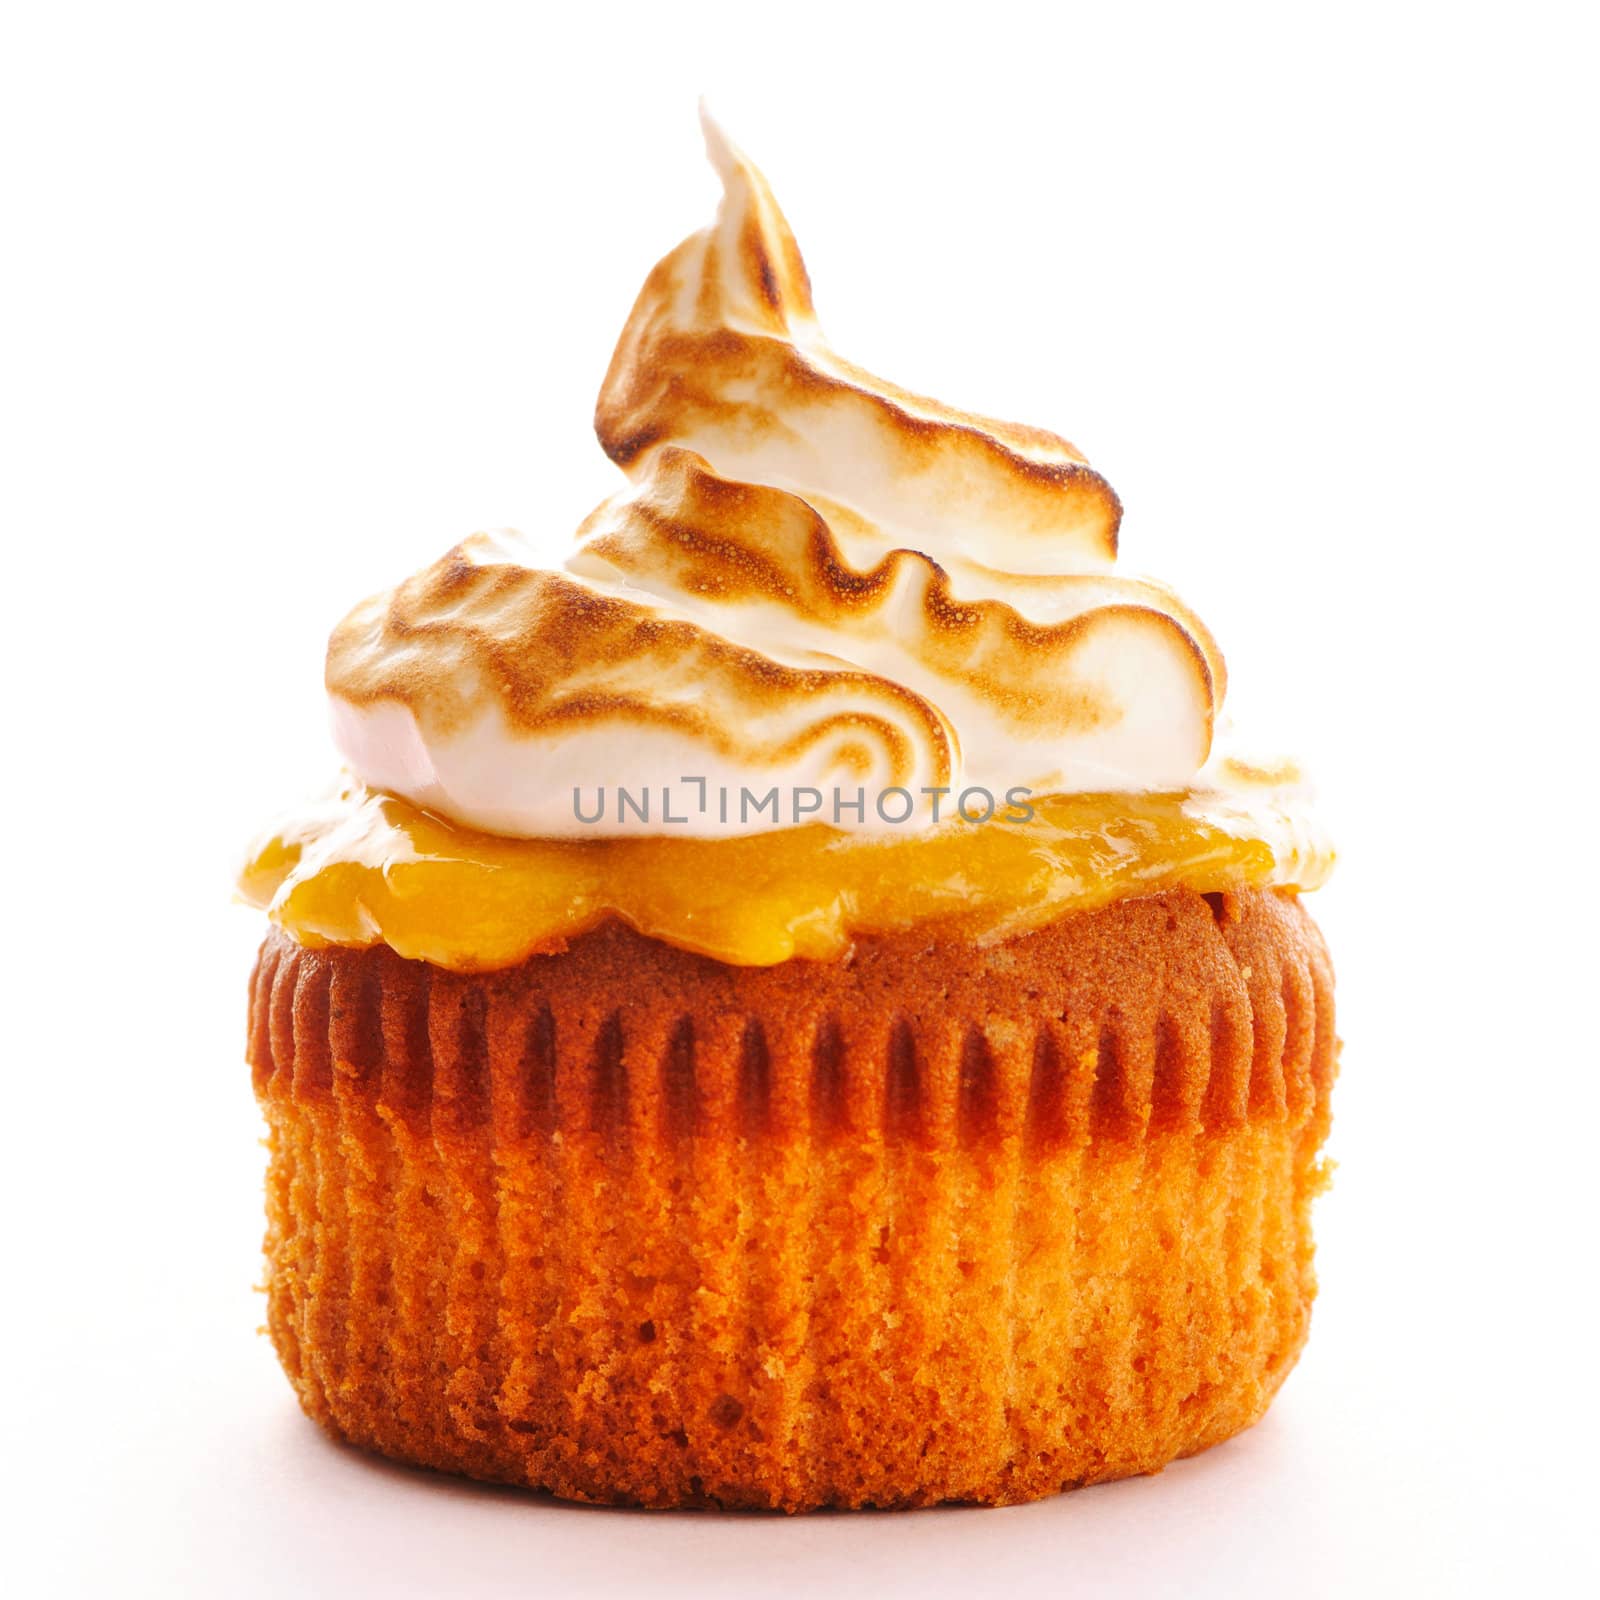 Cupcake with whipped cream by haveseen